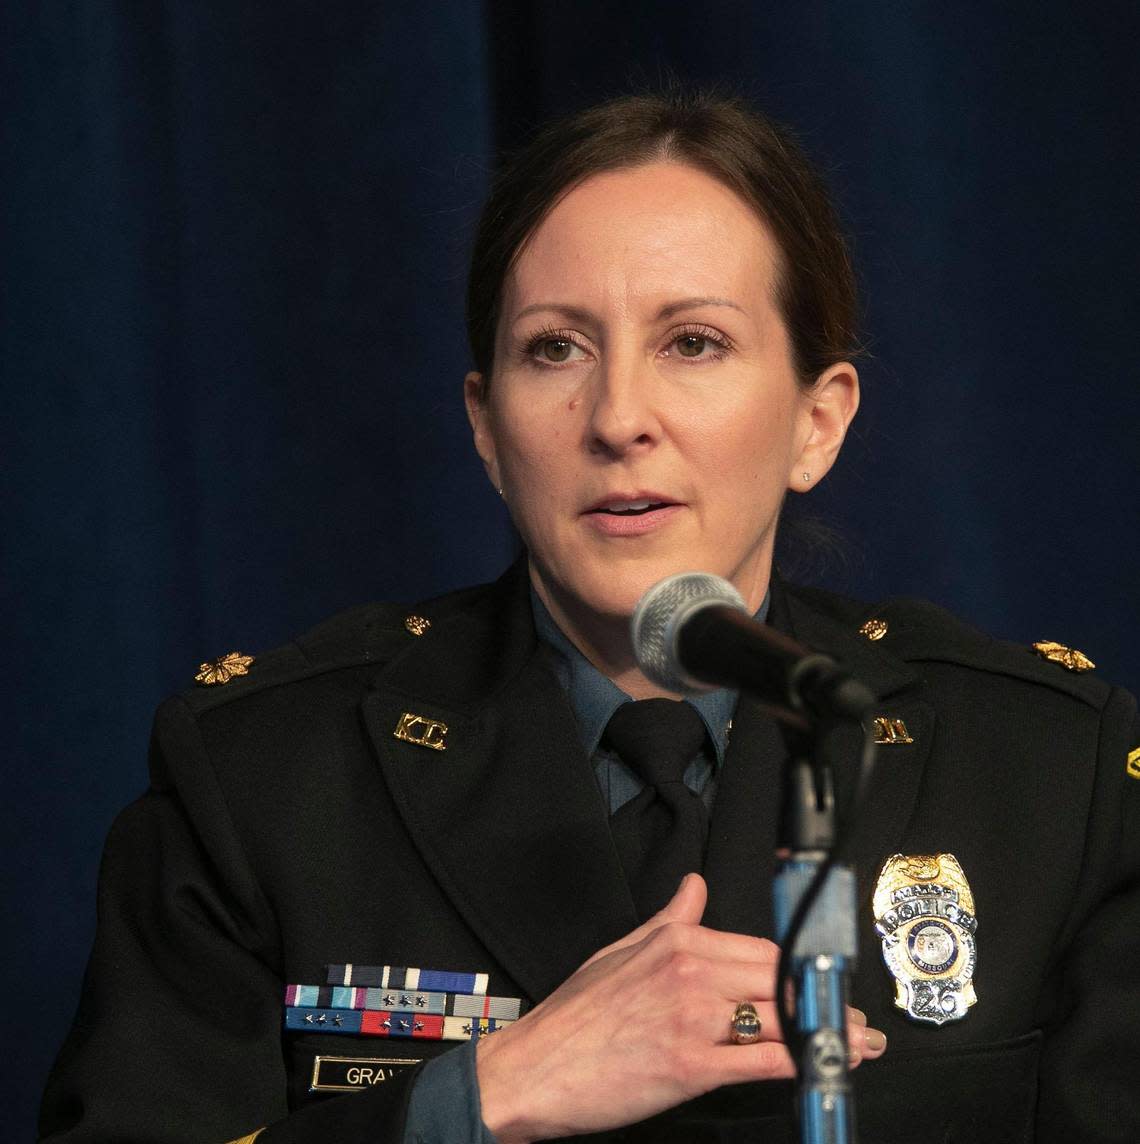 Kansas City Police Department Maj. Stacey Graves, one of three finalists for KCPD chief of police answered questions during a public forum with the three finalists Saturday, December 10, 2022 at the Robert J. Mohart Multipurpose Center, 3200 Wayne Avenue, Kansas City, MO.  